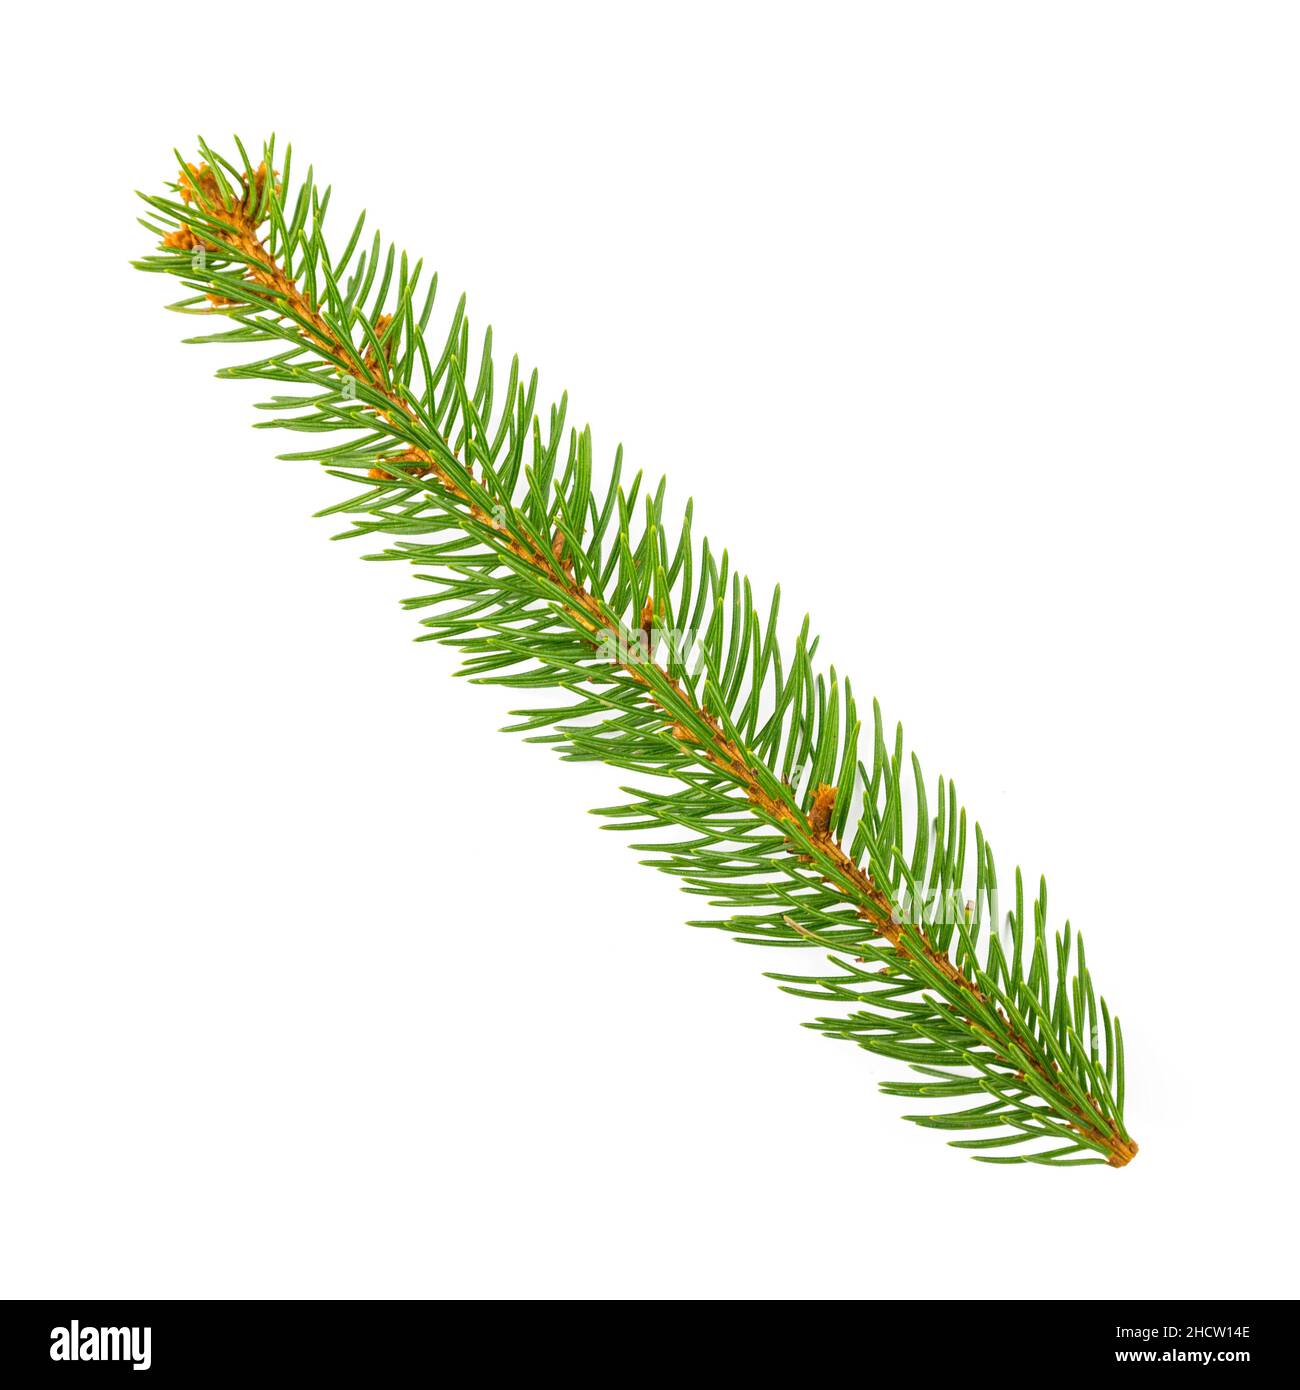 pine branch isolated on white background Stock Photo